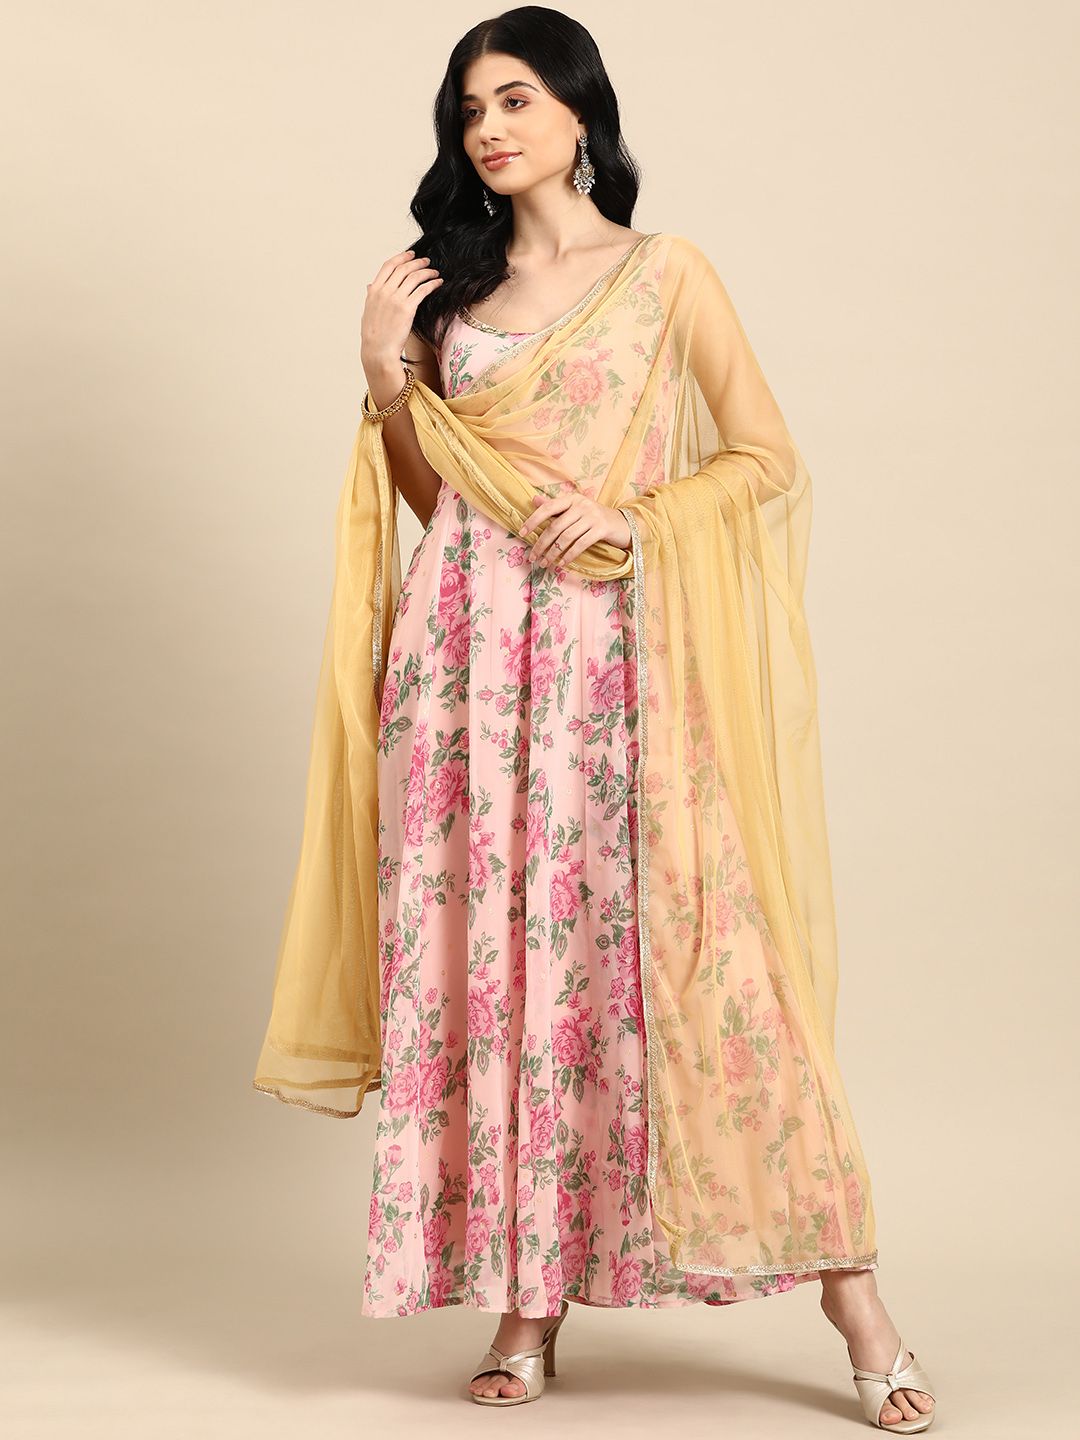 all about you Pink & Mustard Yellow Floral Print A-Line Maxi Dress Price in India